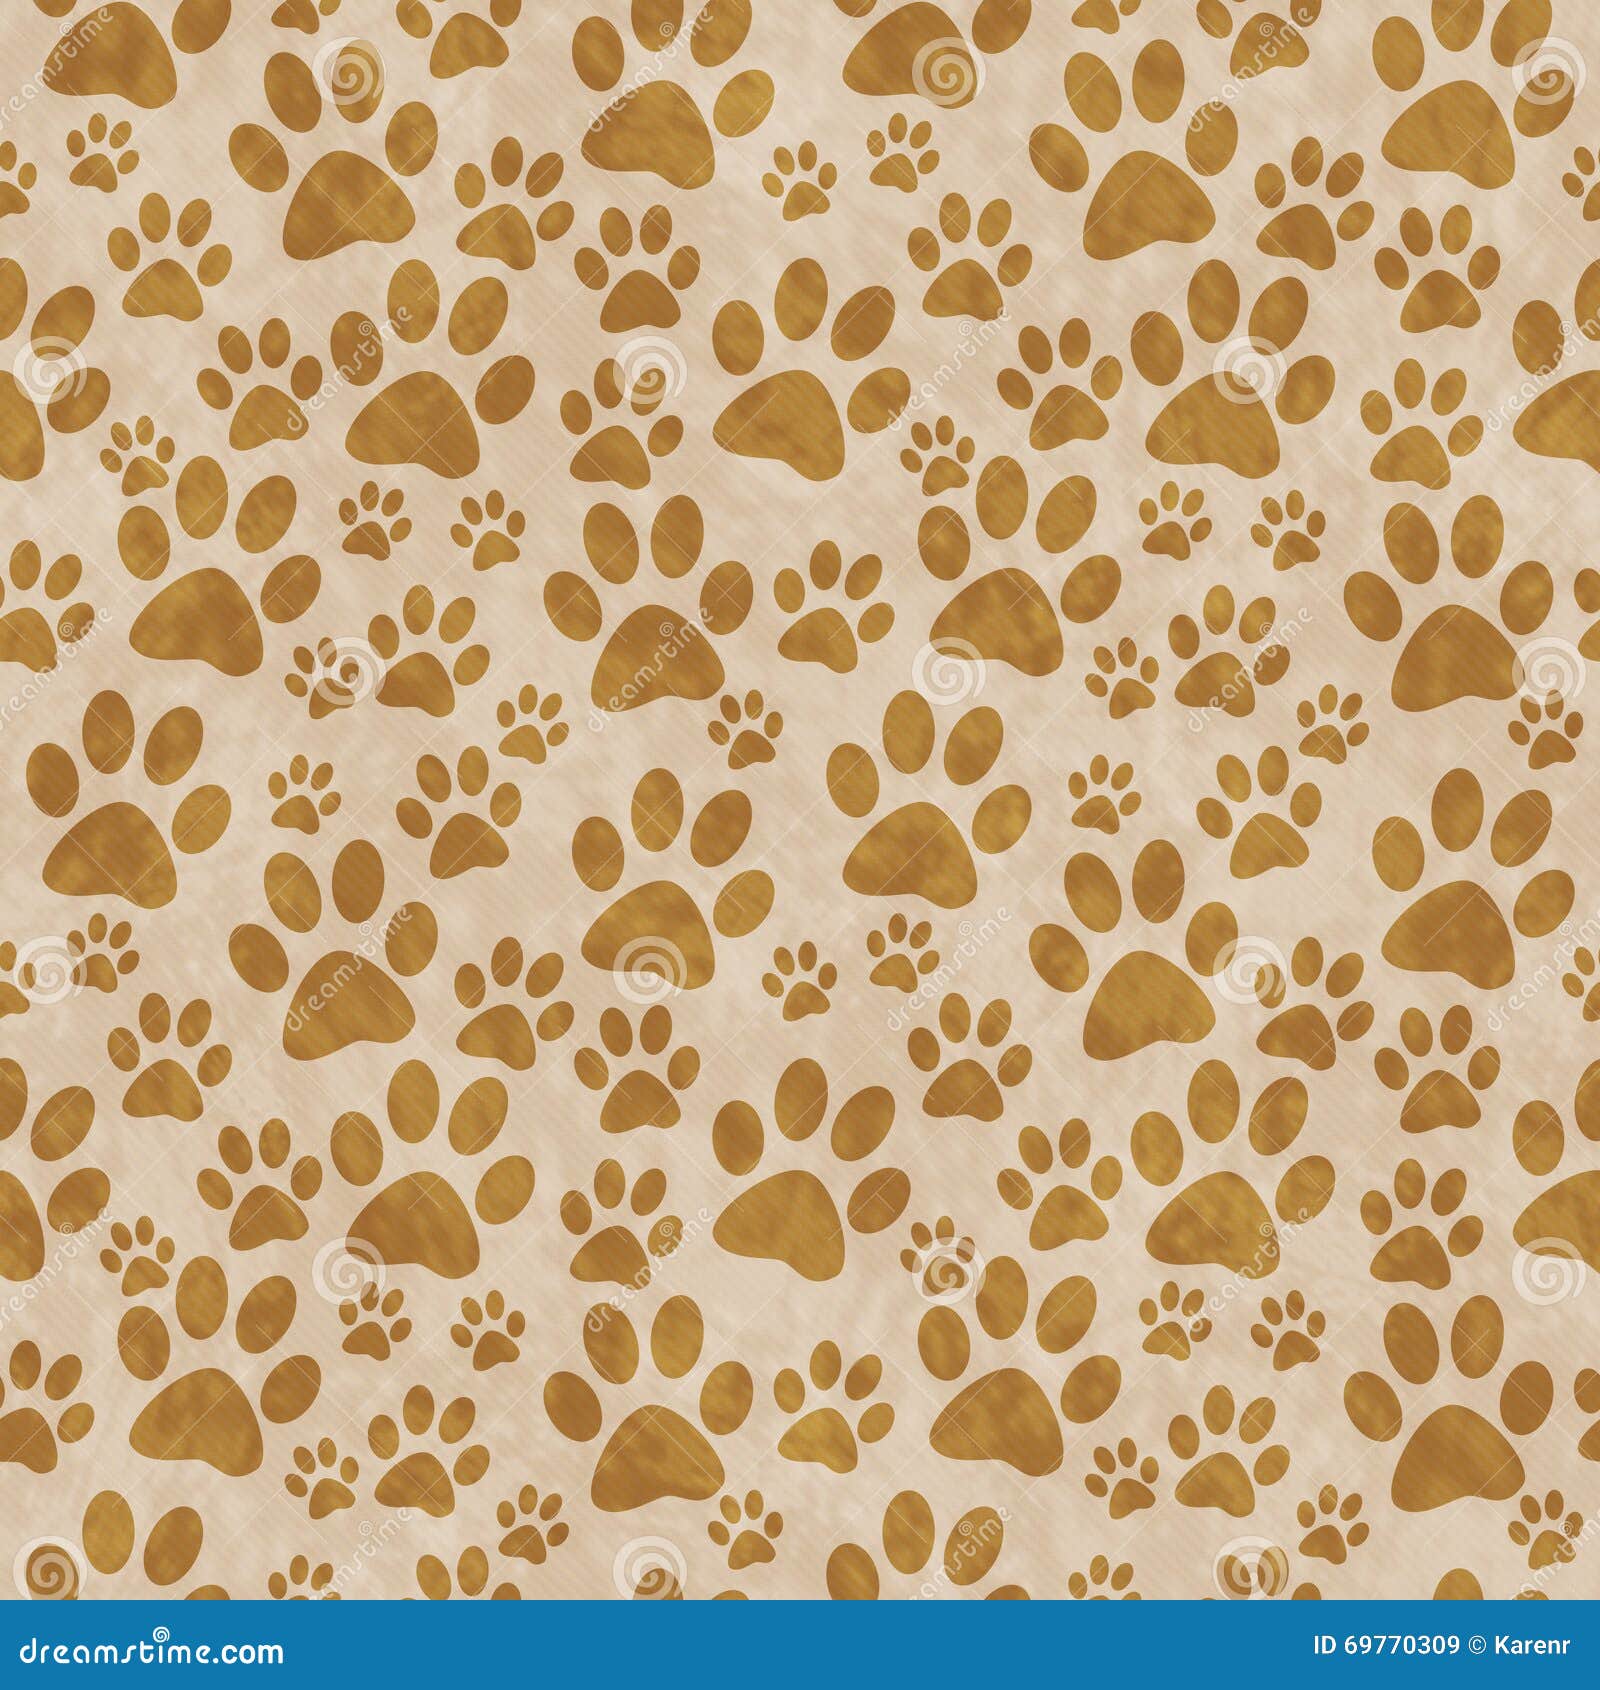 brown doggy paw print tile pattern repeat background